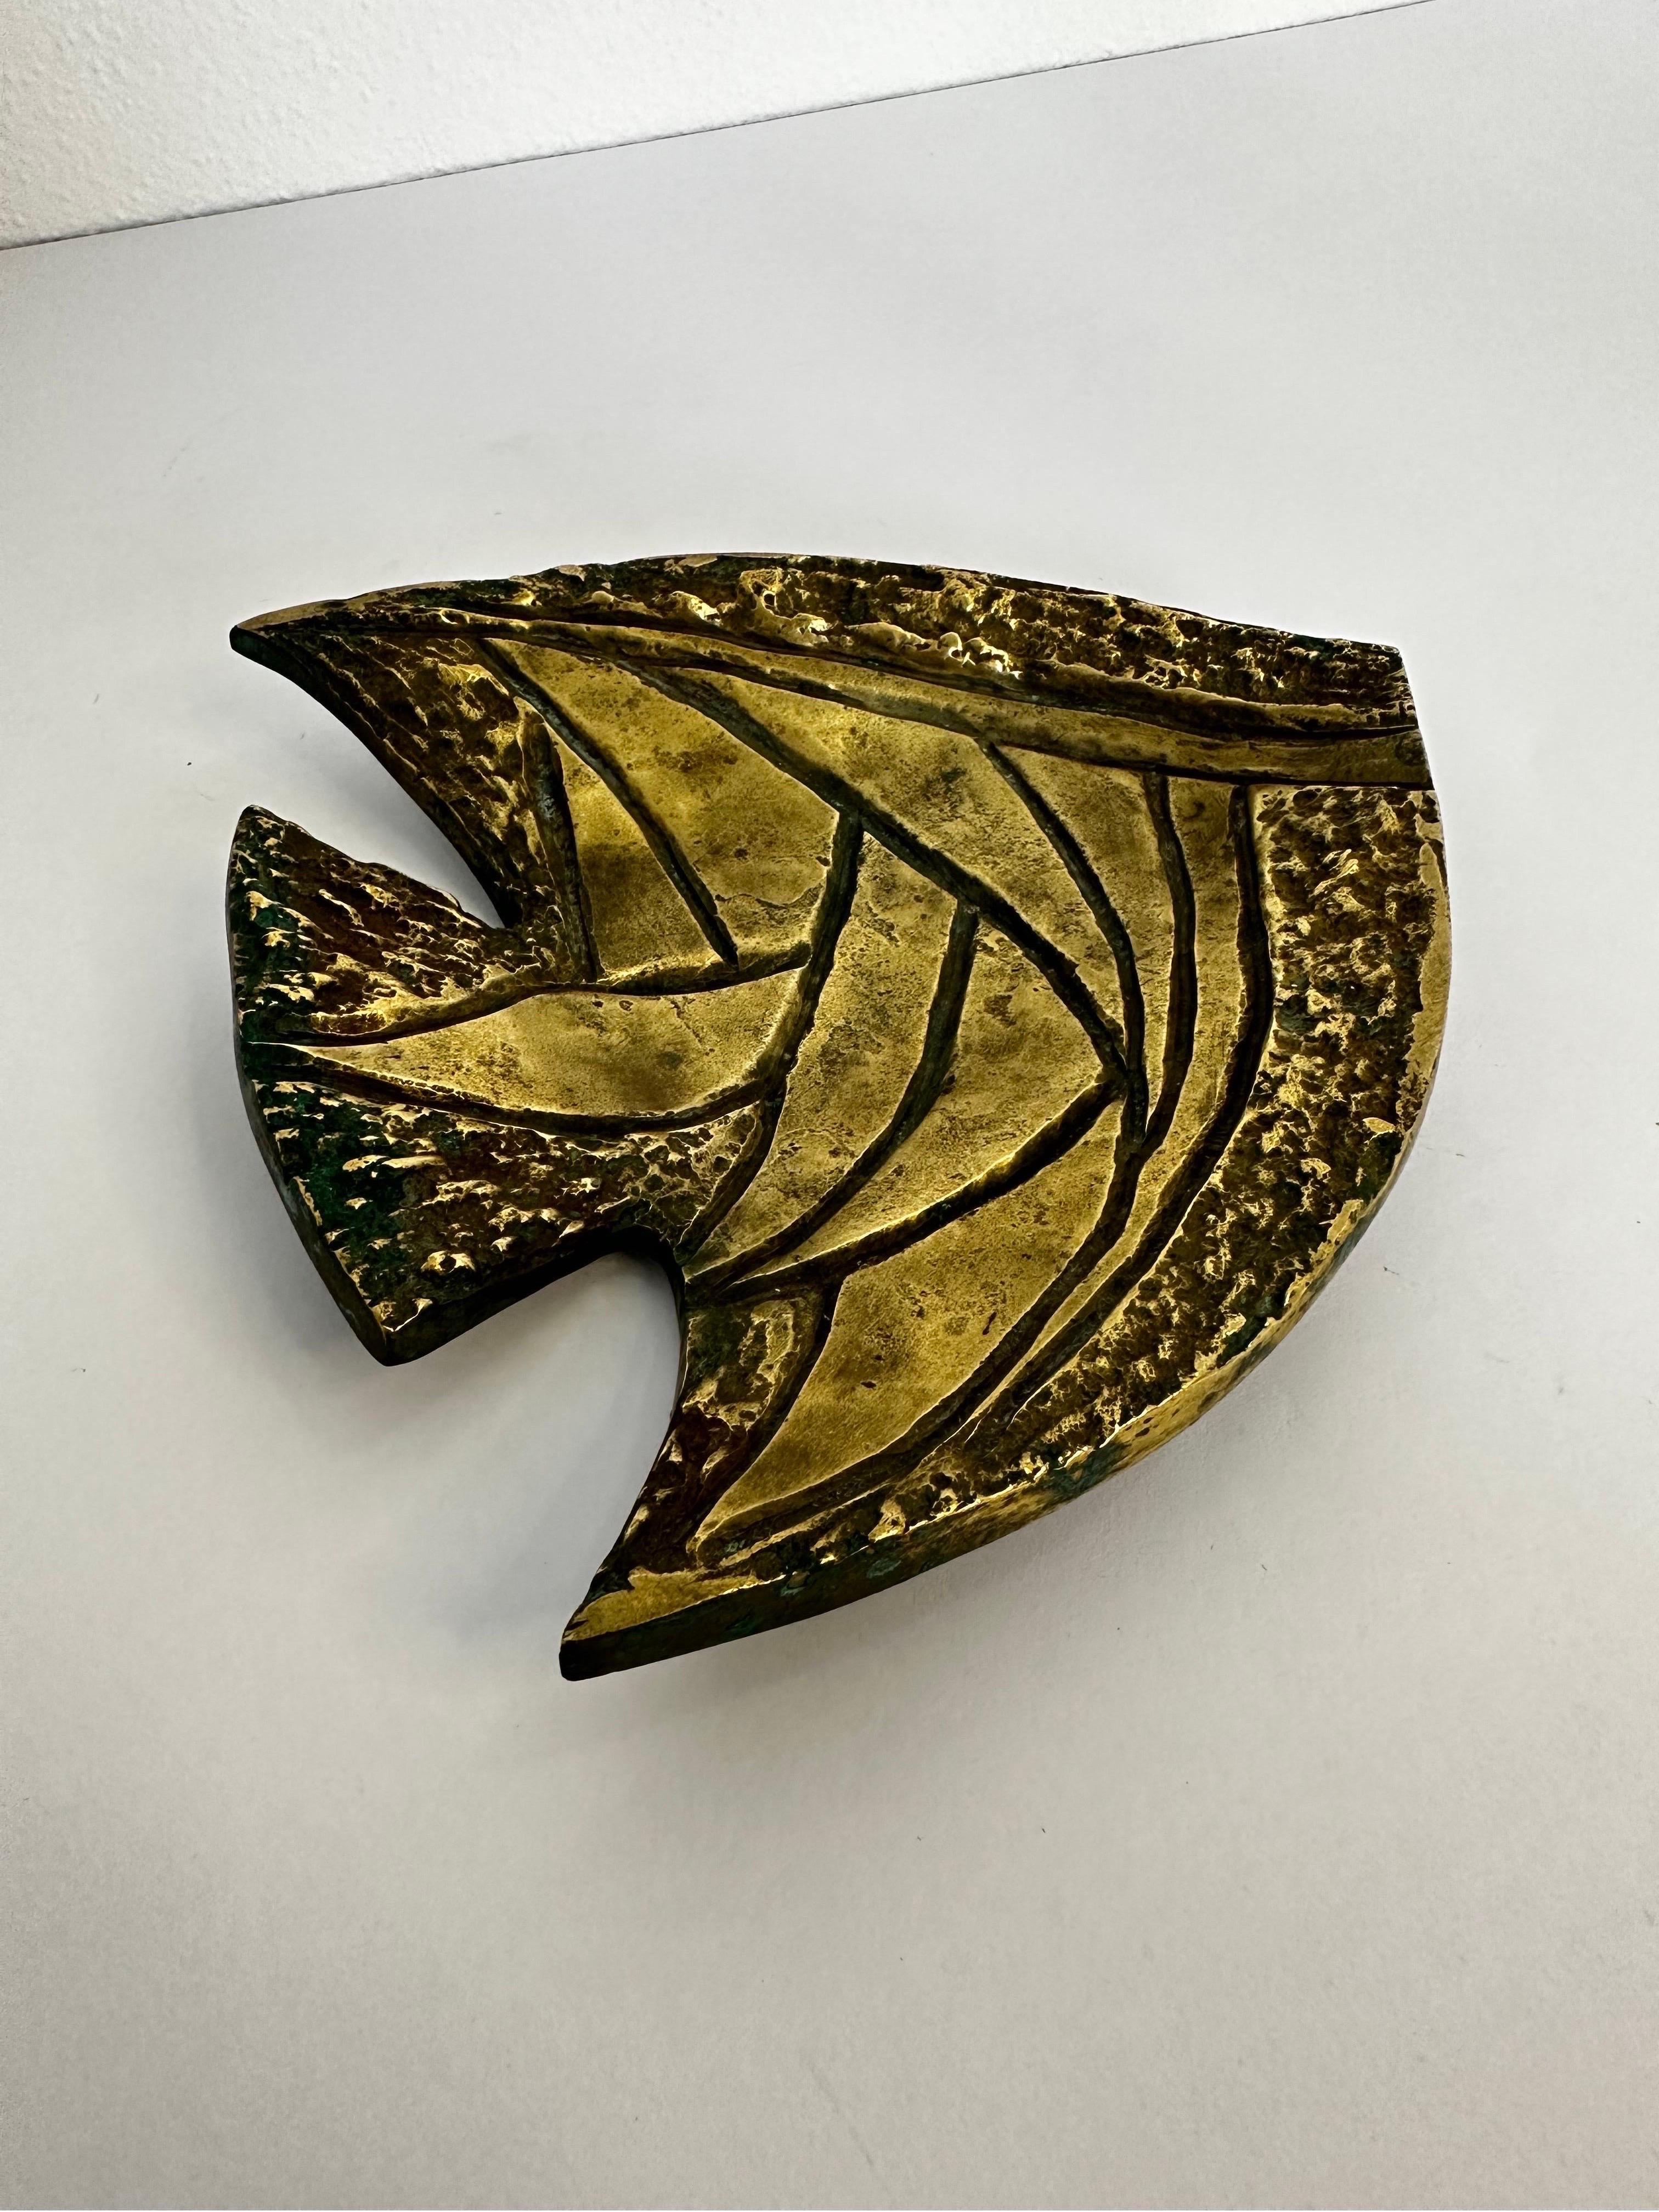 Brazilian mid-century sculptural fish patinated bronze tray or catch-all with geometric designs.  Unsigned circa 1960s.